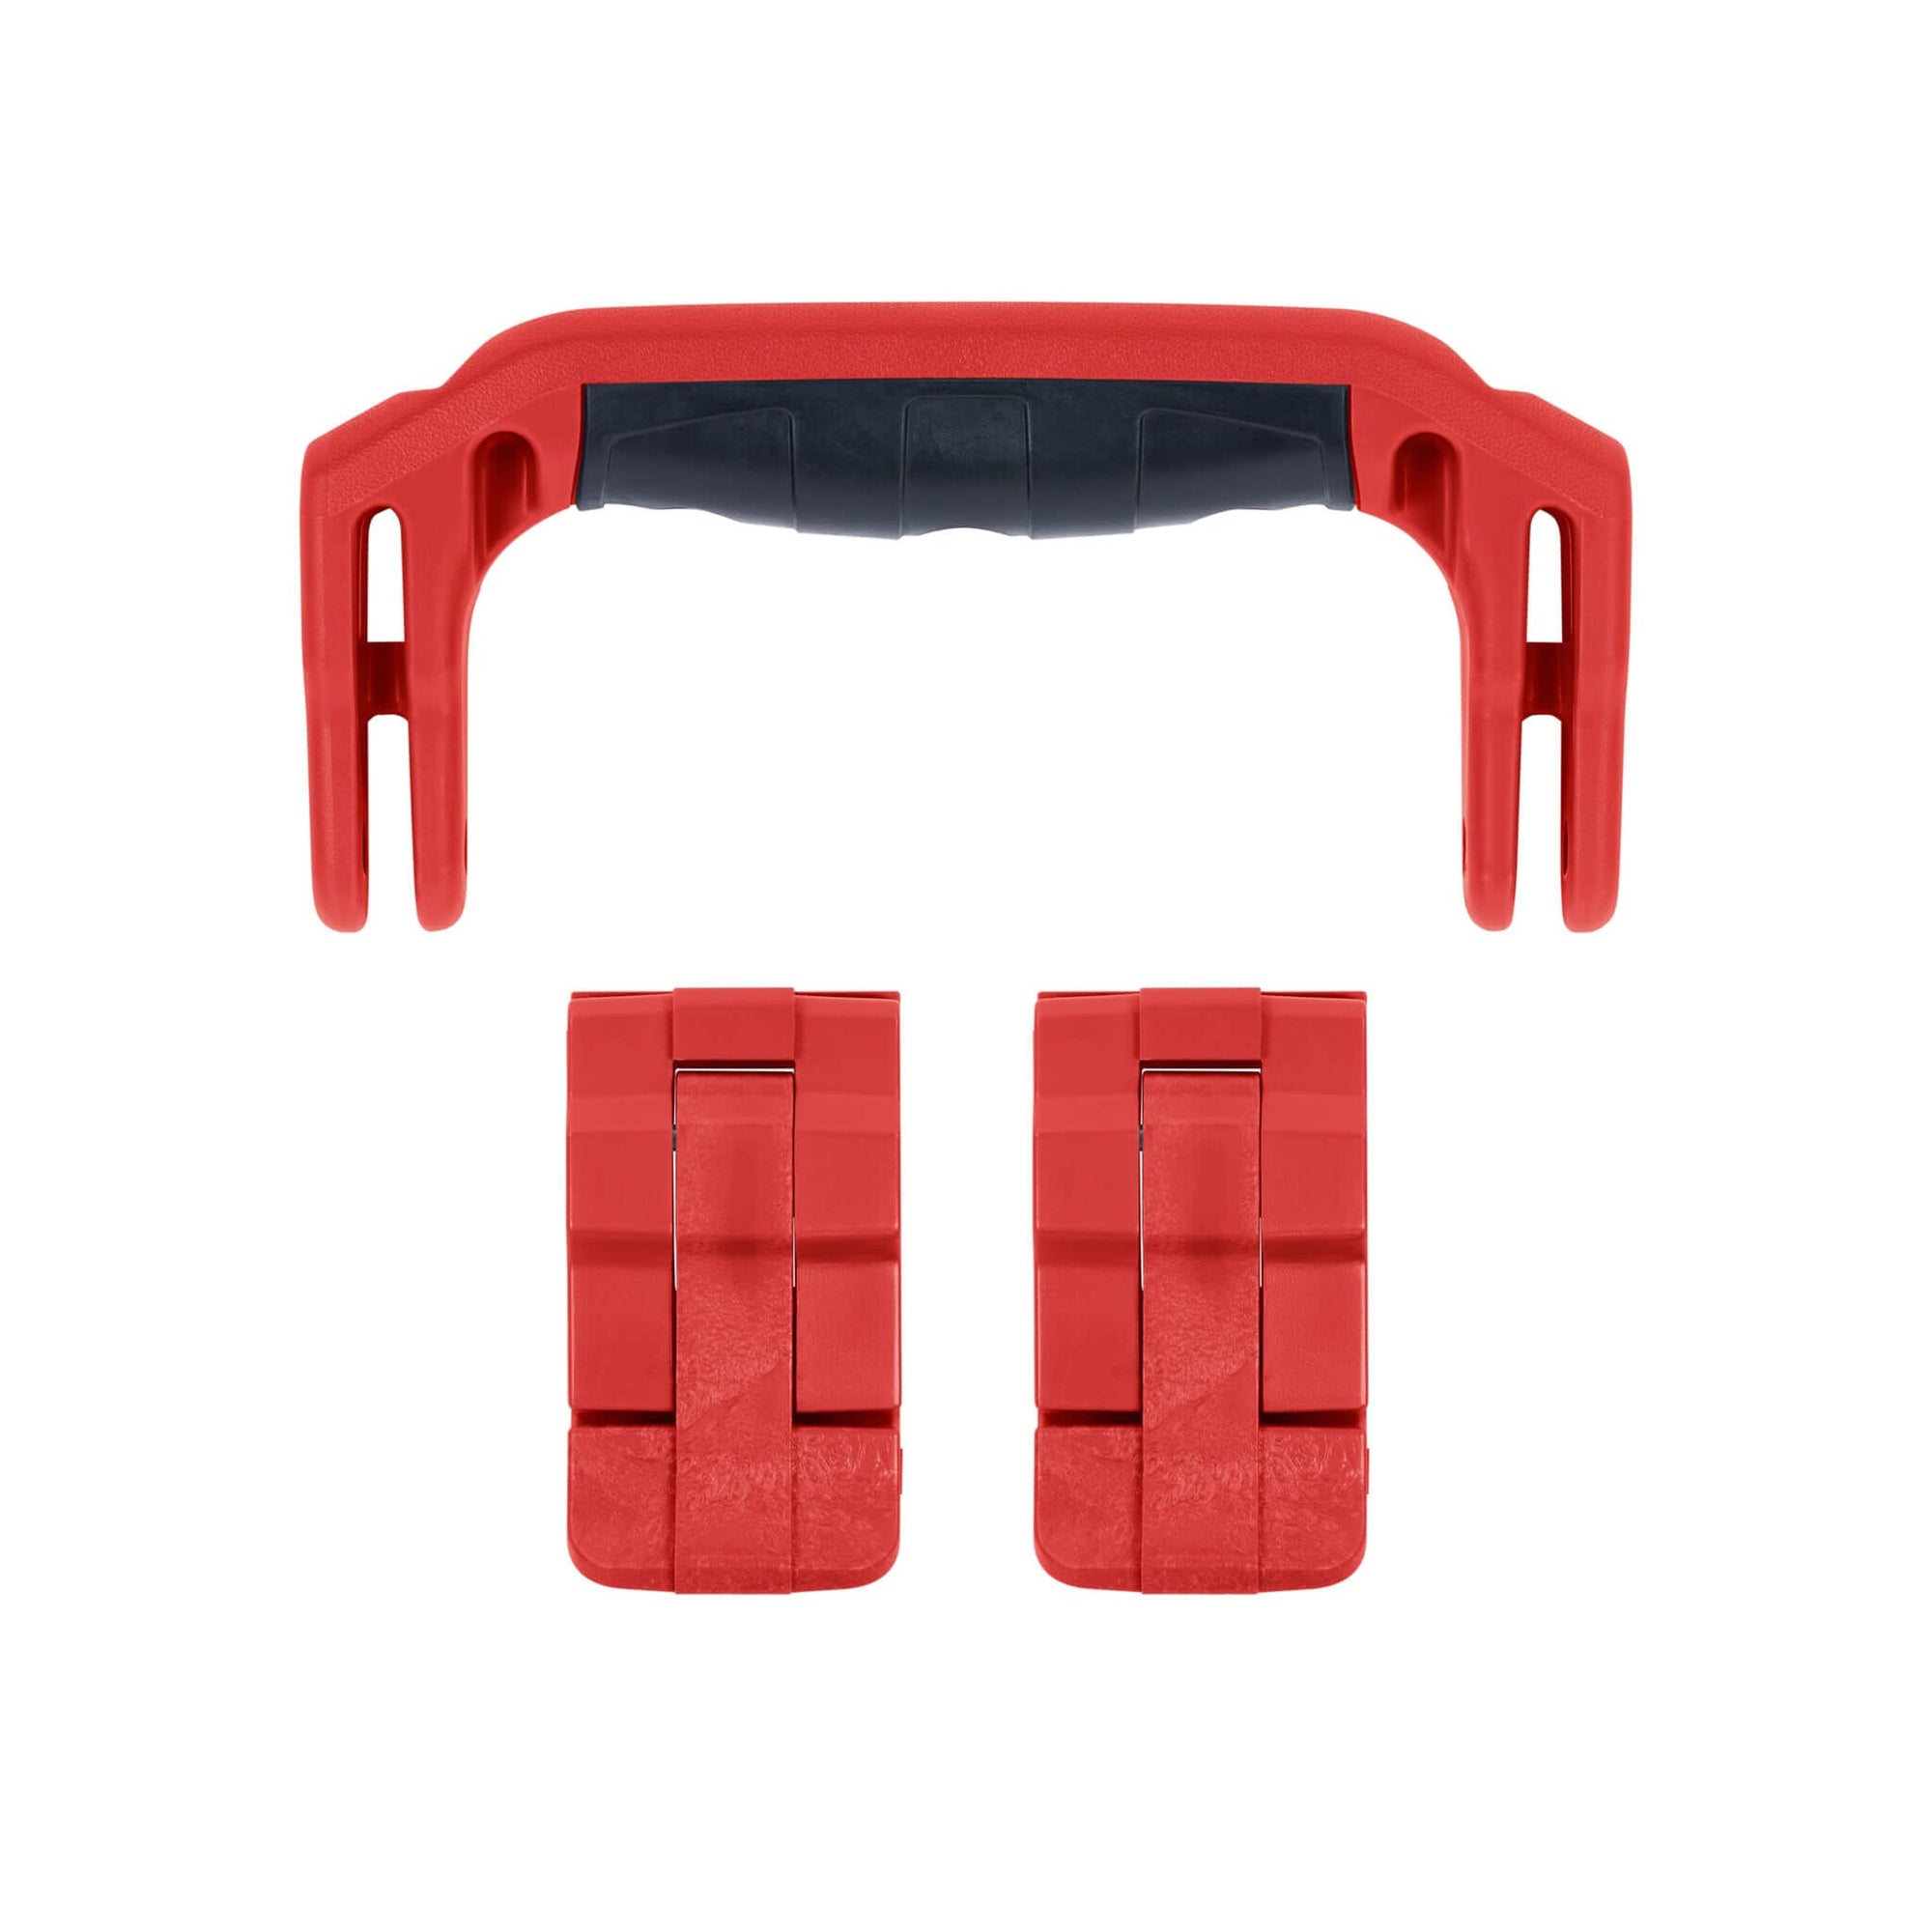 Pelican 1400 Replacement Handle & Latches, Red (Set of 1 Handle, 2 Latches) ColorCase 